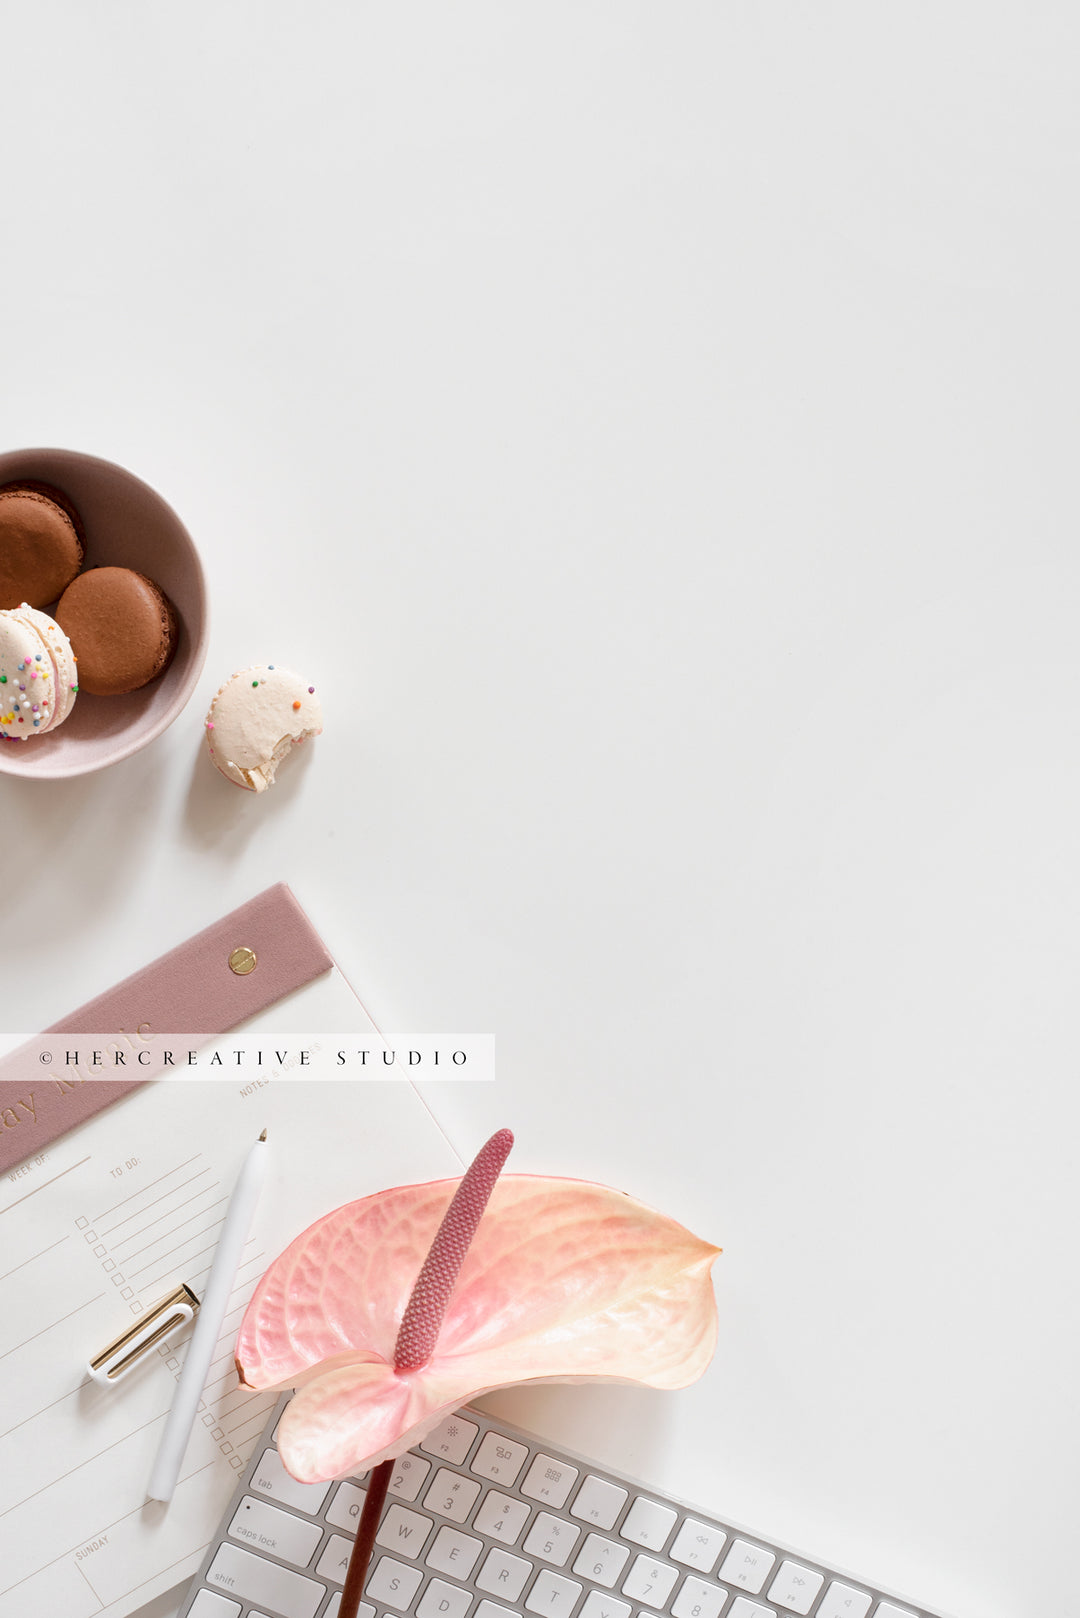 Planner, Macarons & Peace Lilly. Digital Image.